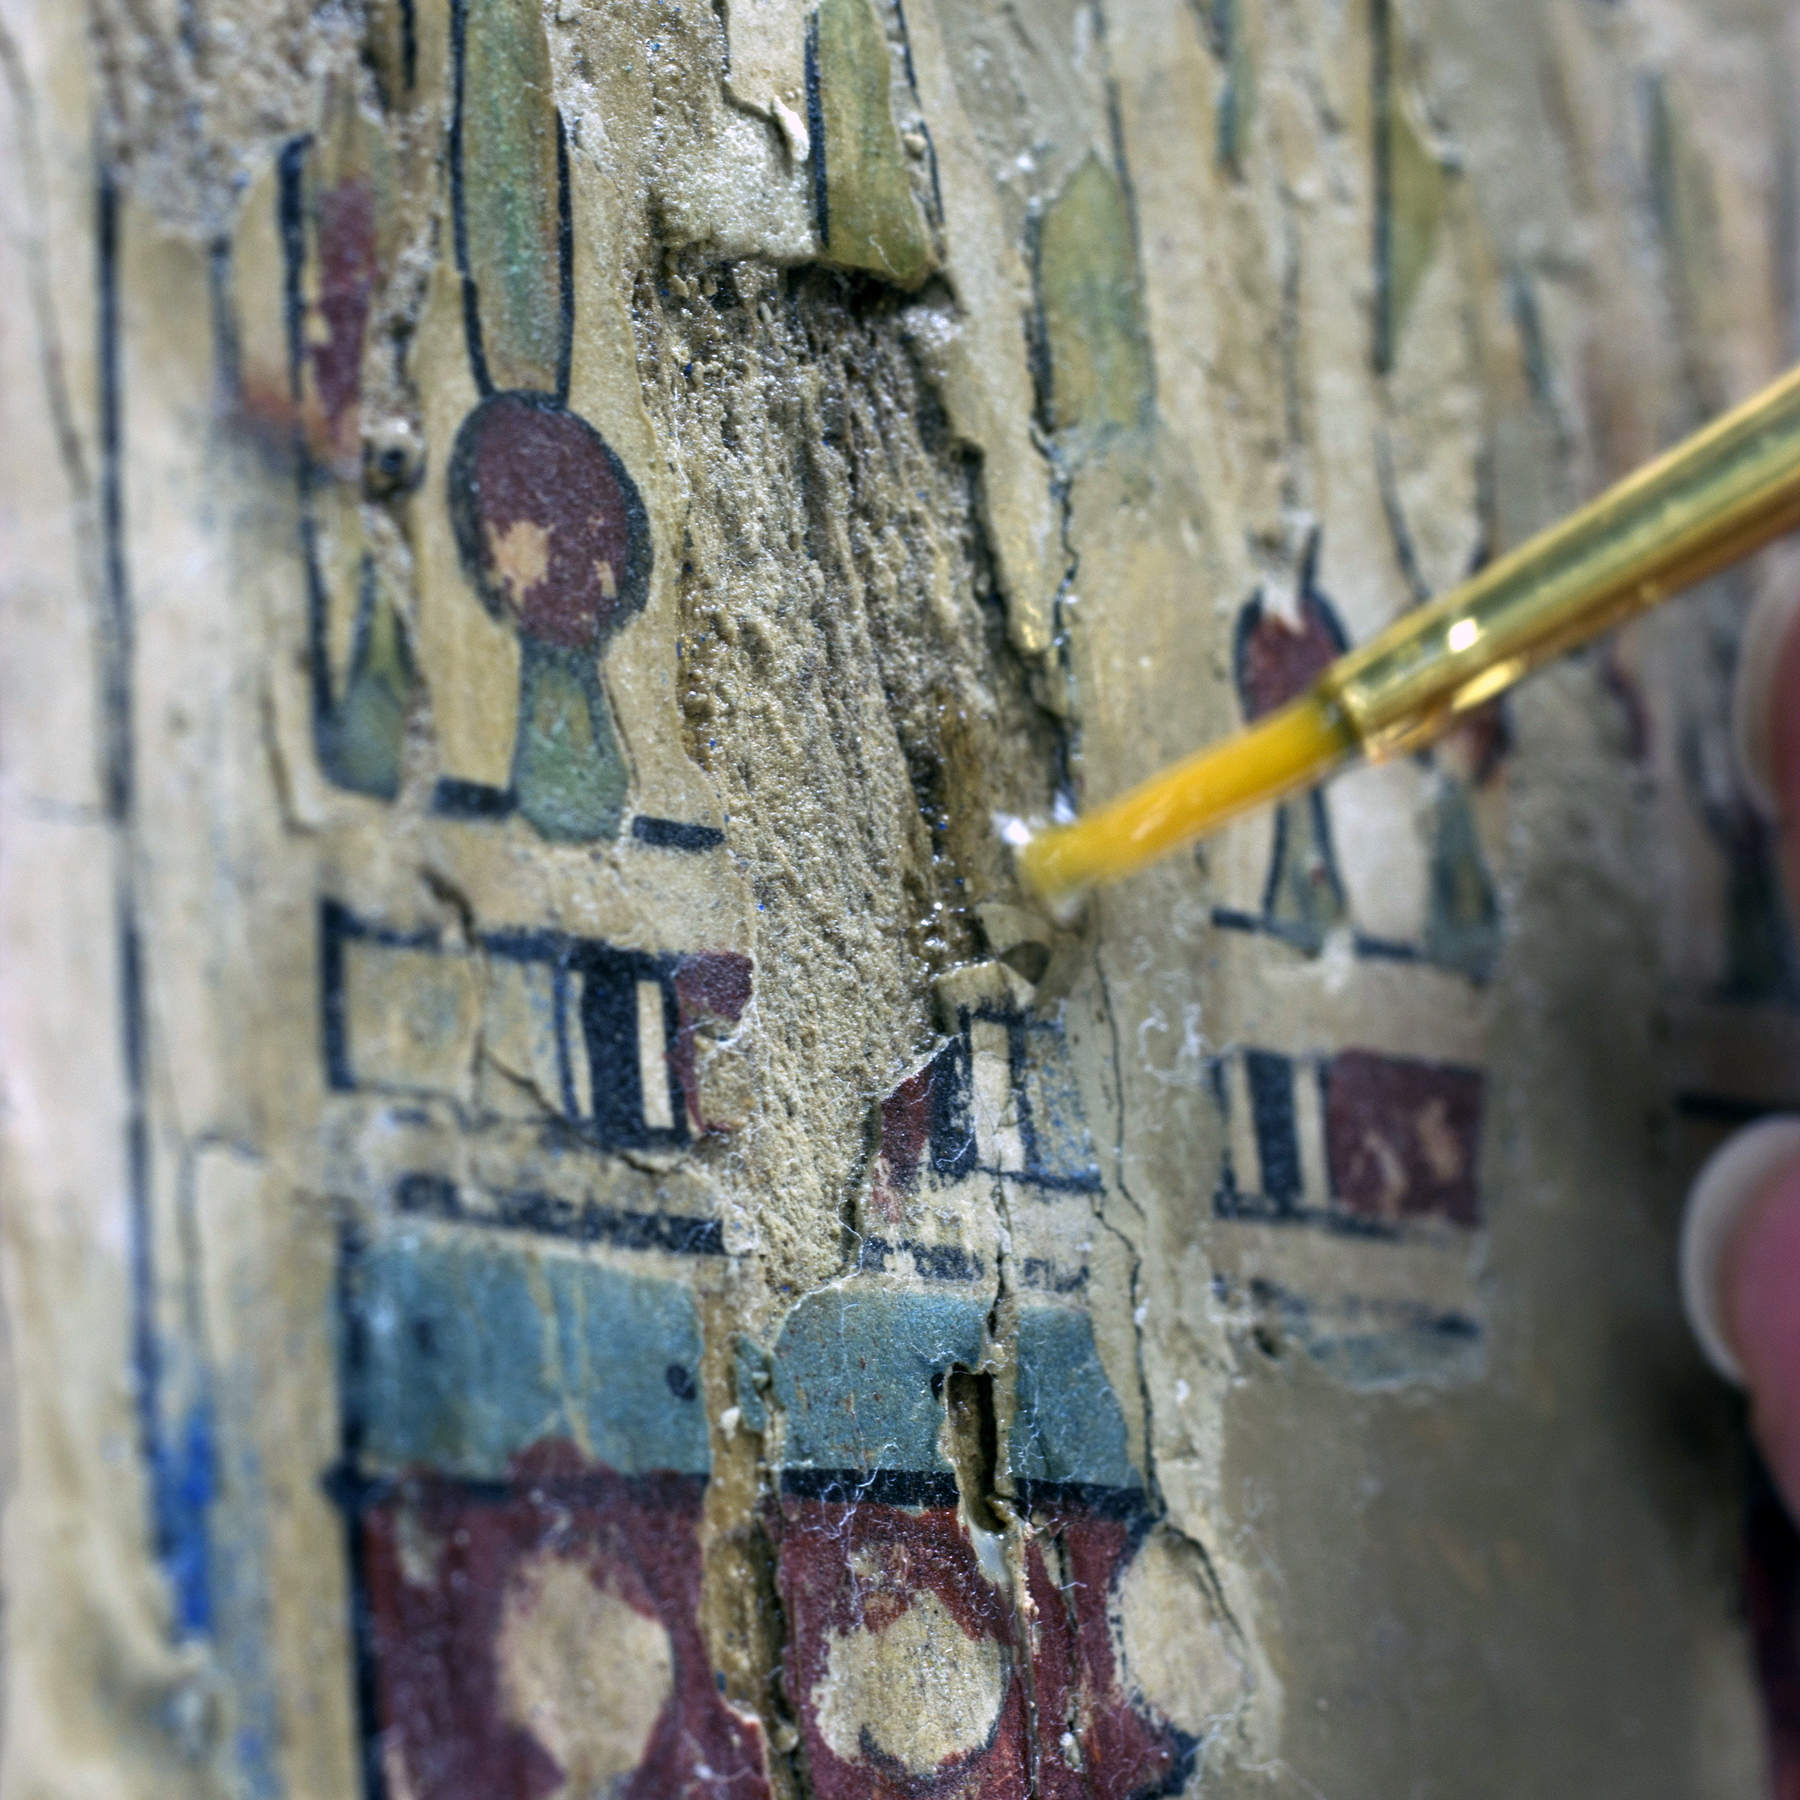 Conservator uses a paintbrush to treat a piece of art